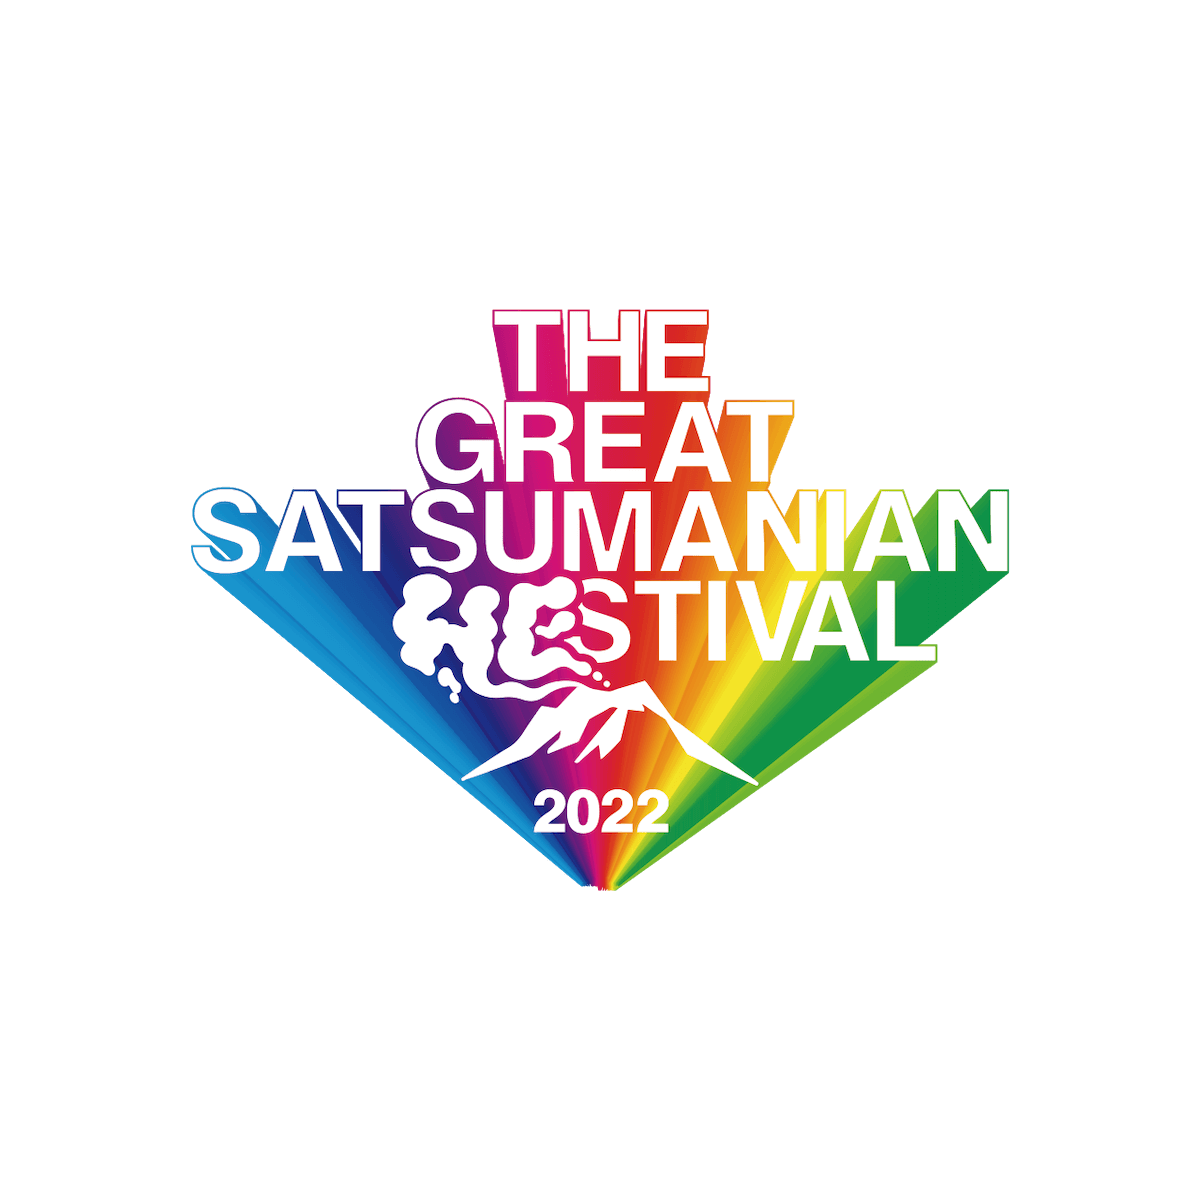 THE GREAT SATSUMANIAN HESTIVAL 2022開催決定！！